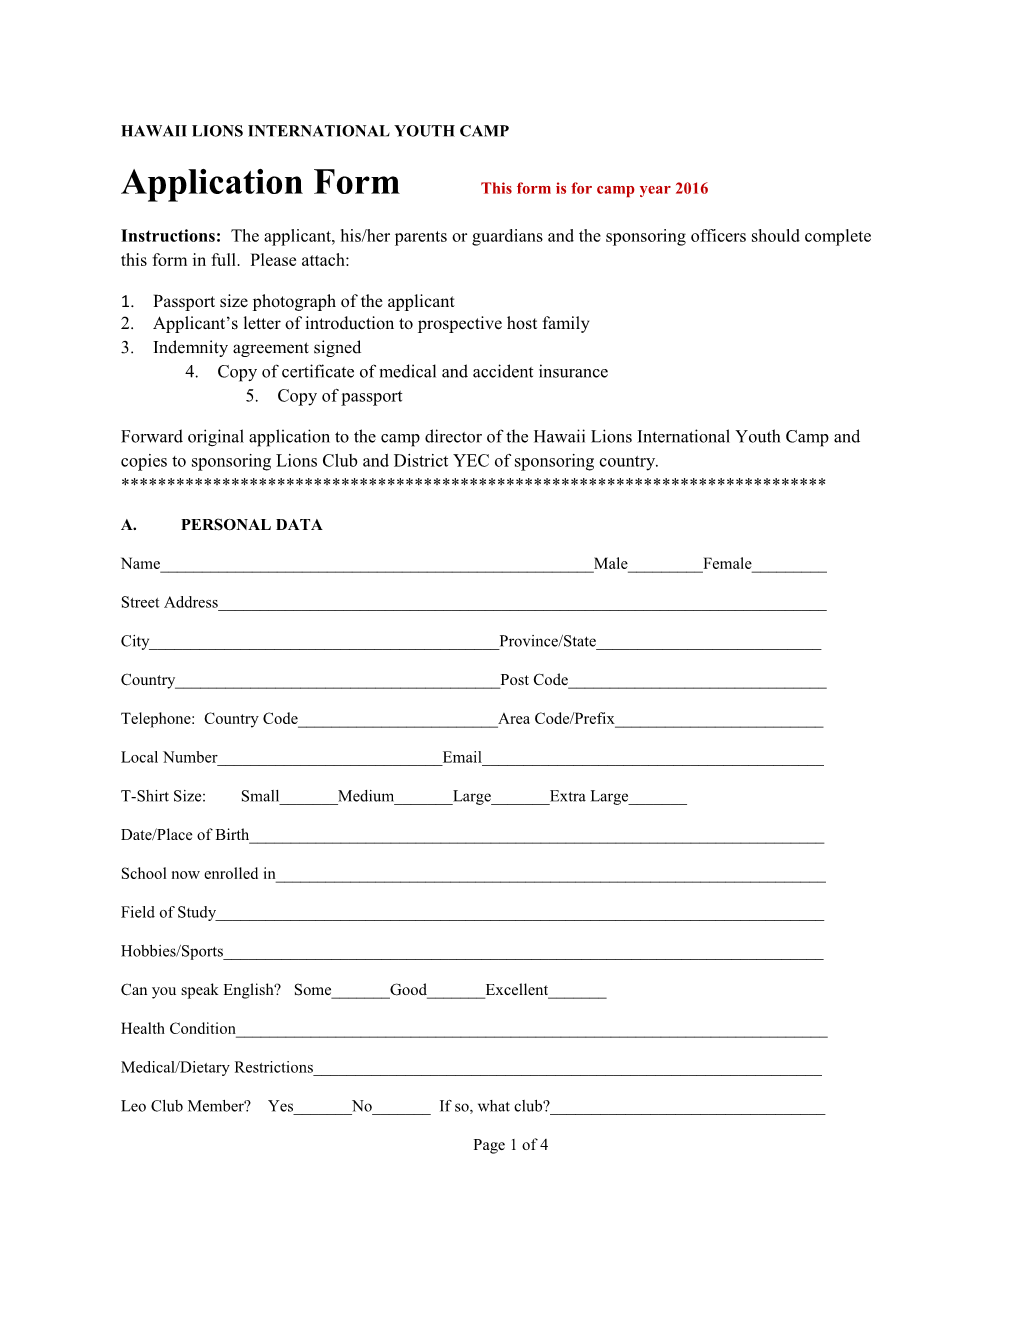 Application Form This Form Is for Camp Year 2016